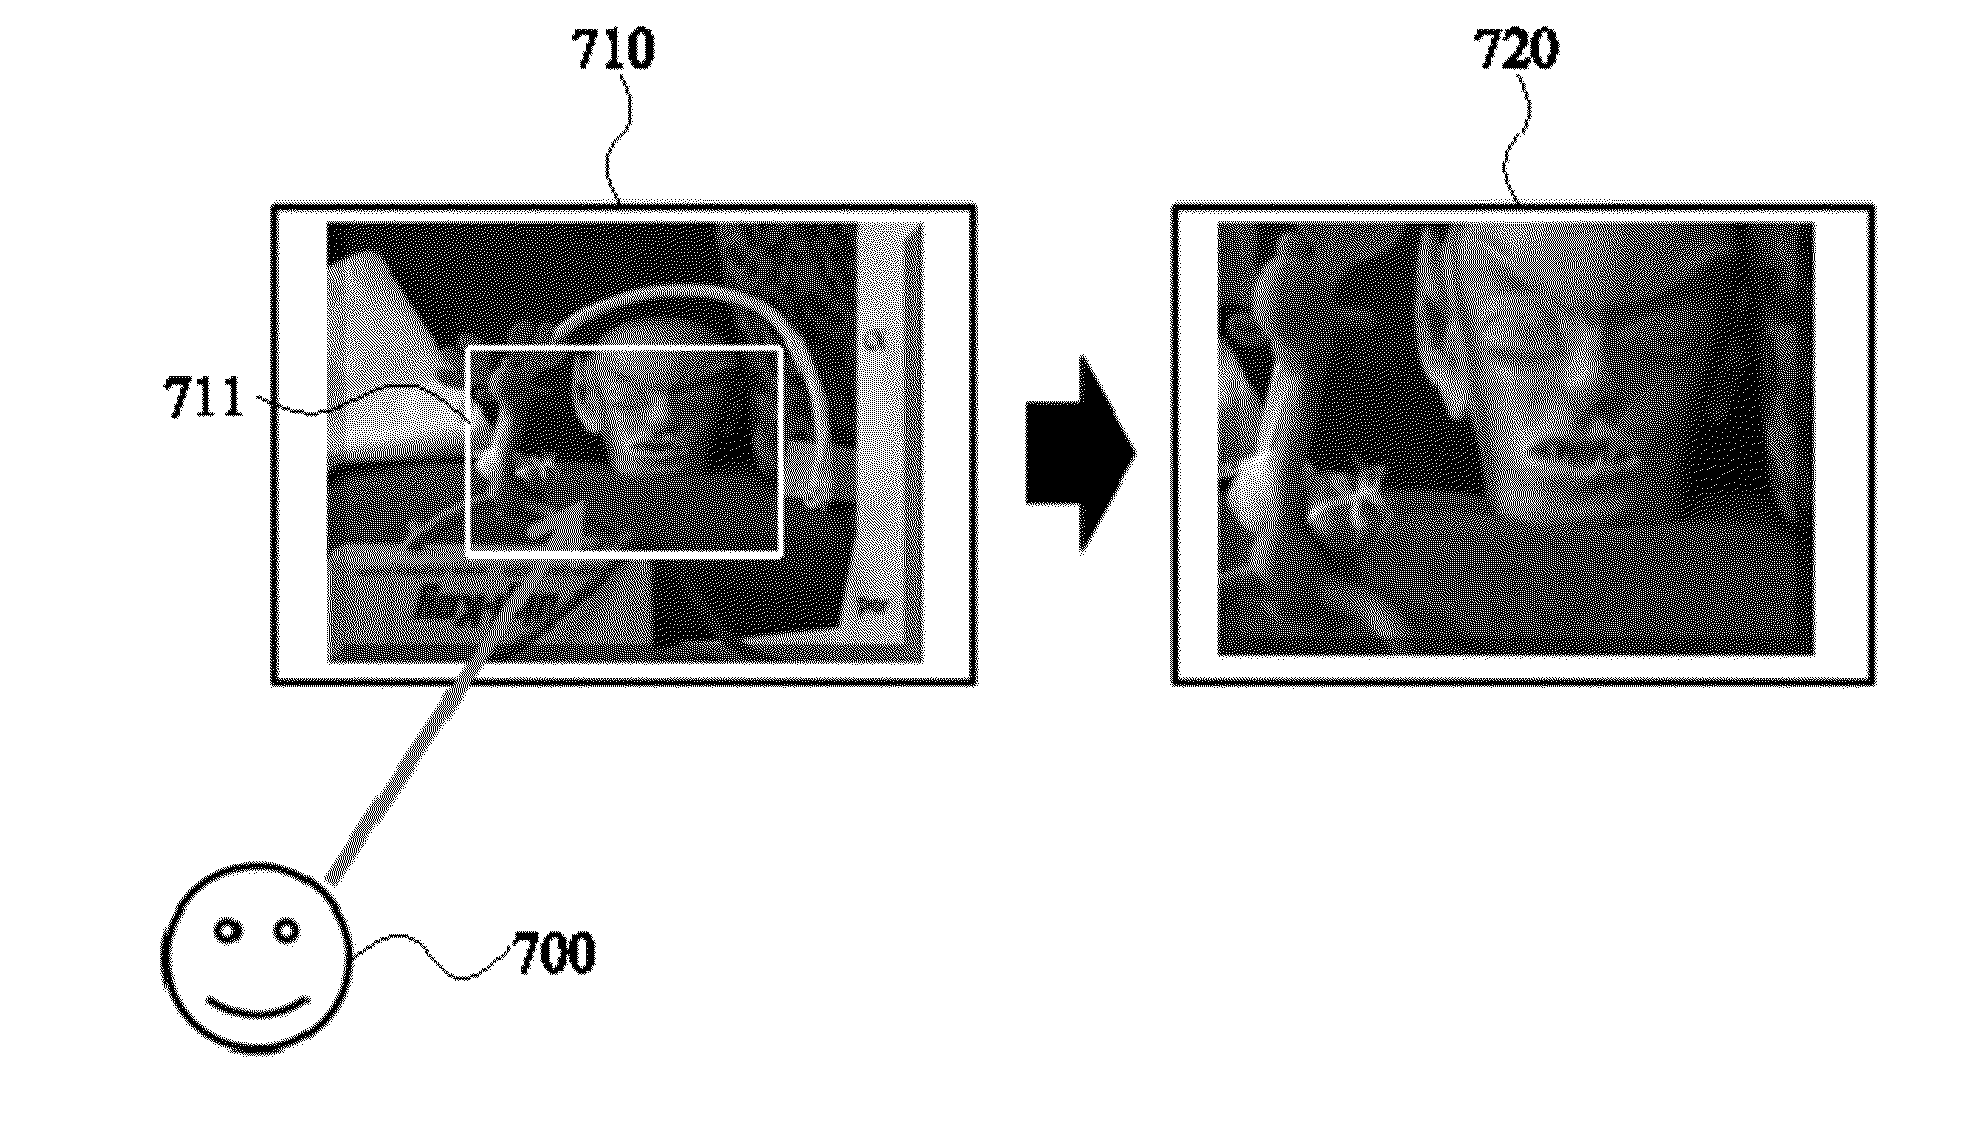 Image processing apparatus and method for three-dimensional image zoom